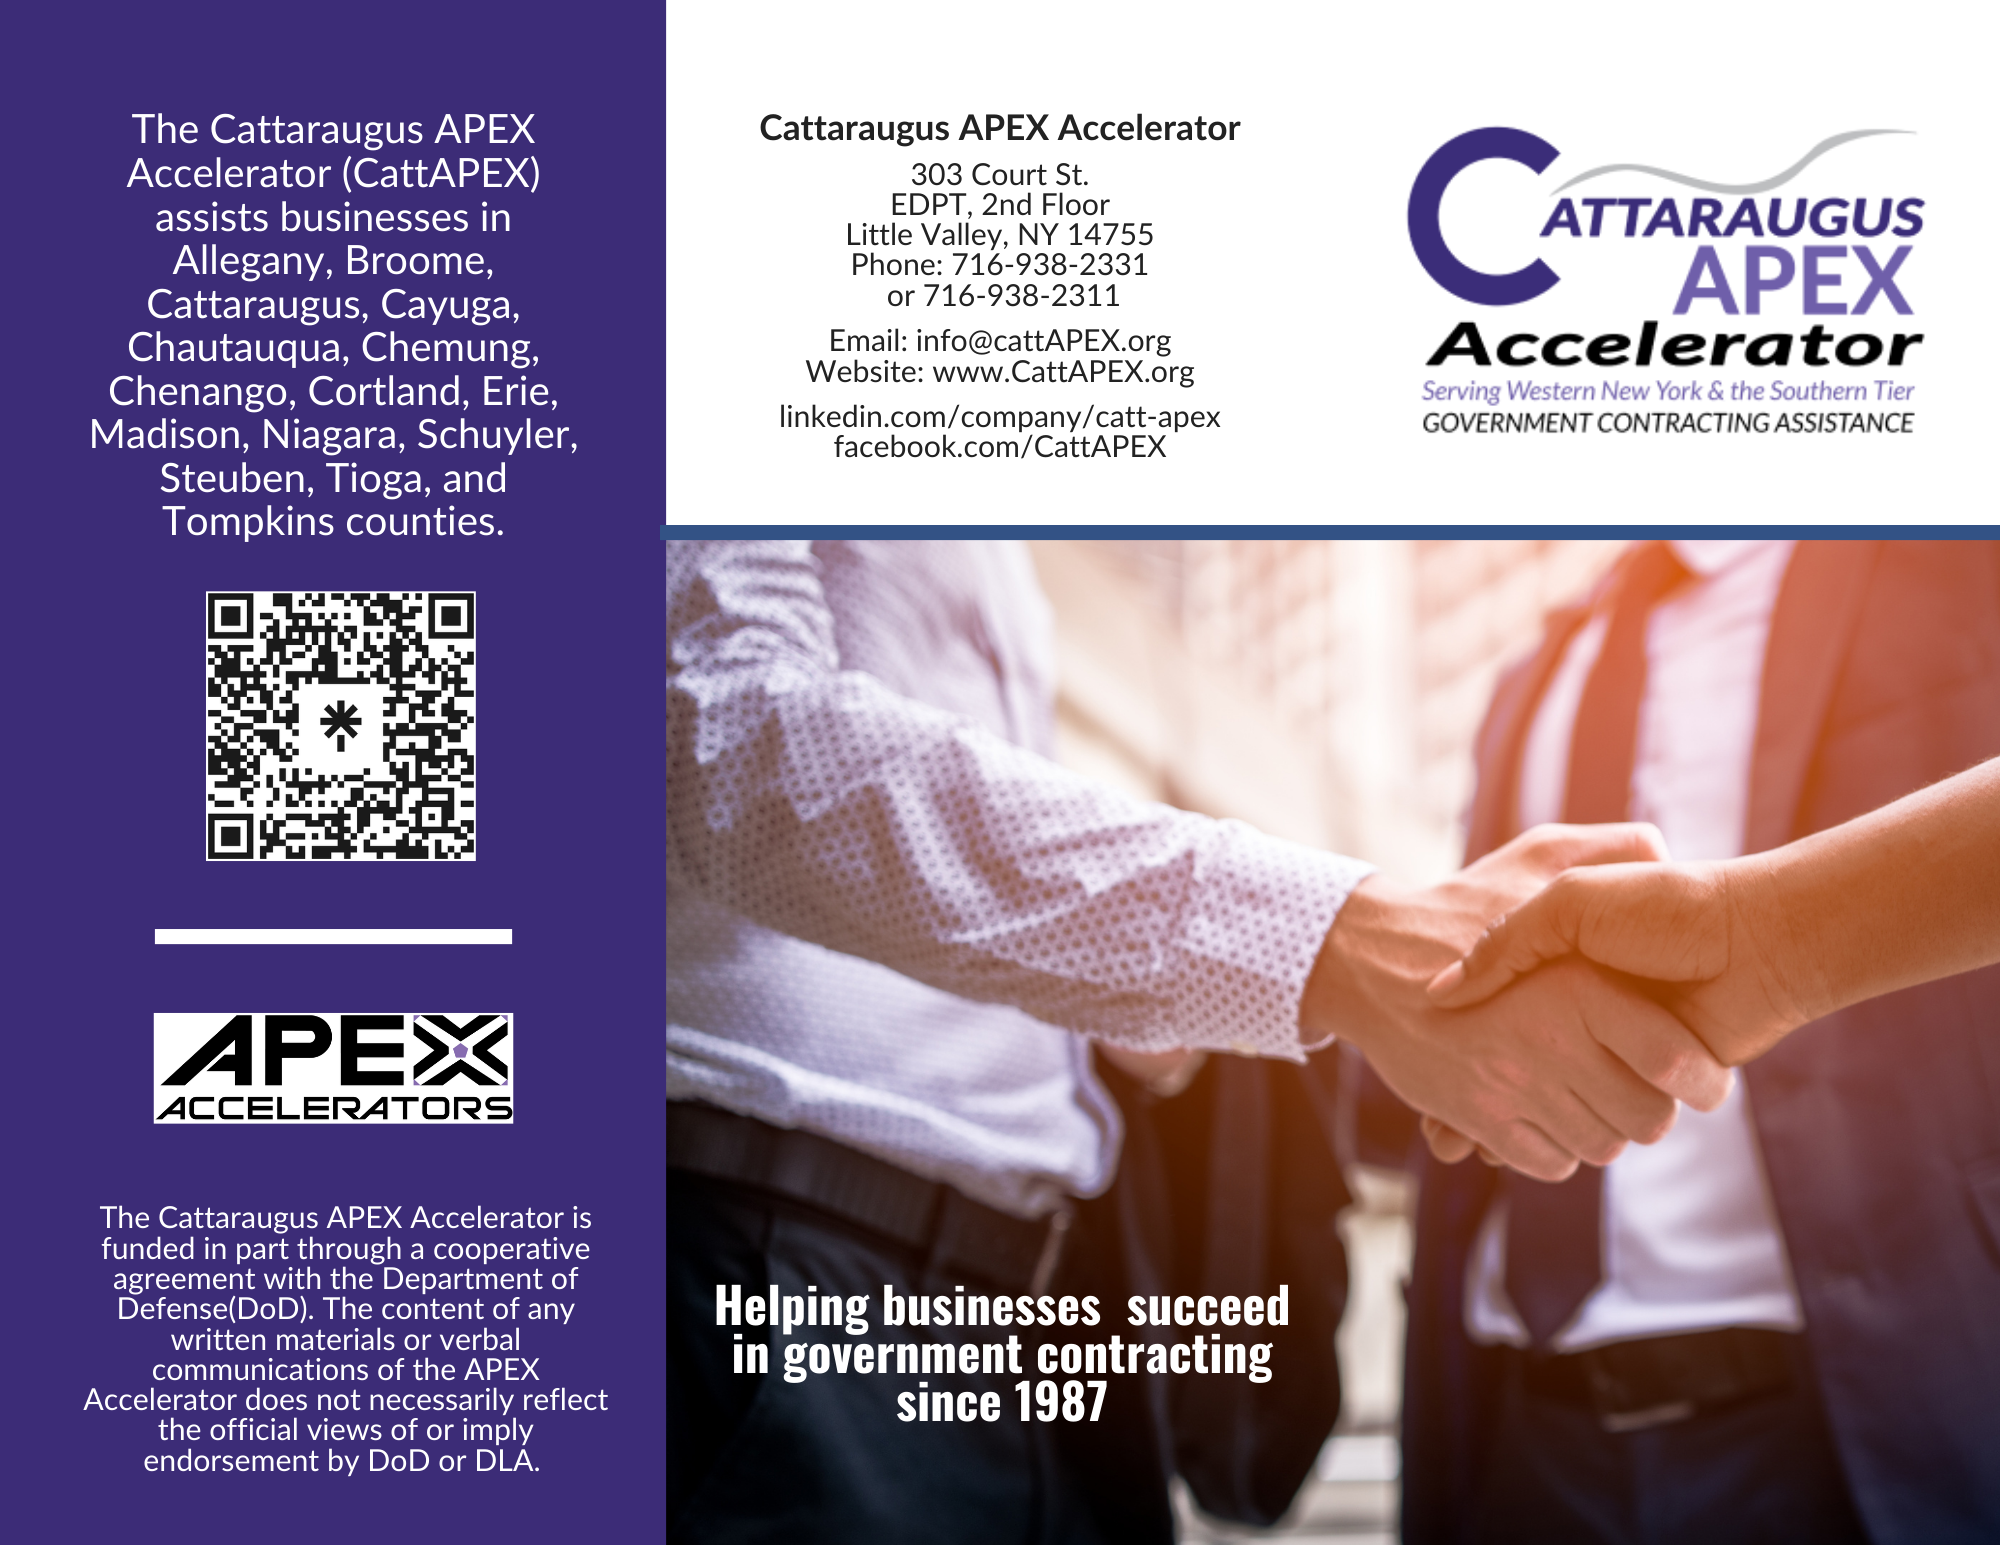 Reference image for this RFP cattapex-brochure-01